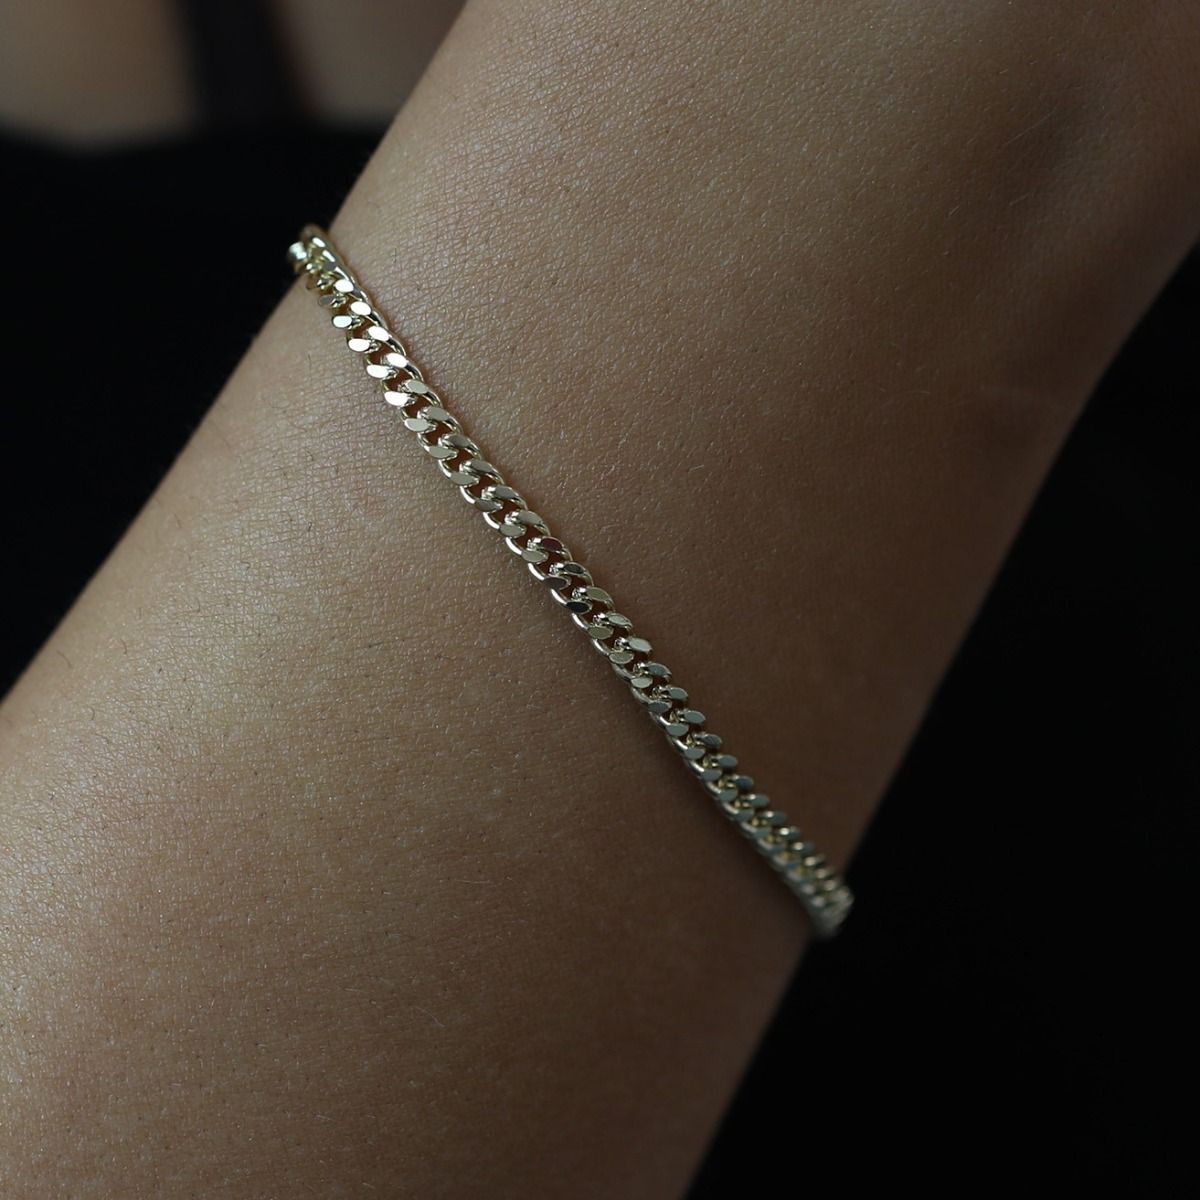 Make a bold statement with this exquisite curb chain gold bracelet. Crafted with precision, it exudes timeless elegance and sophistication. The sturdy links create a stunning visual appeal while reflecting the radiance of the gold. A versatile accessory t